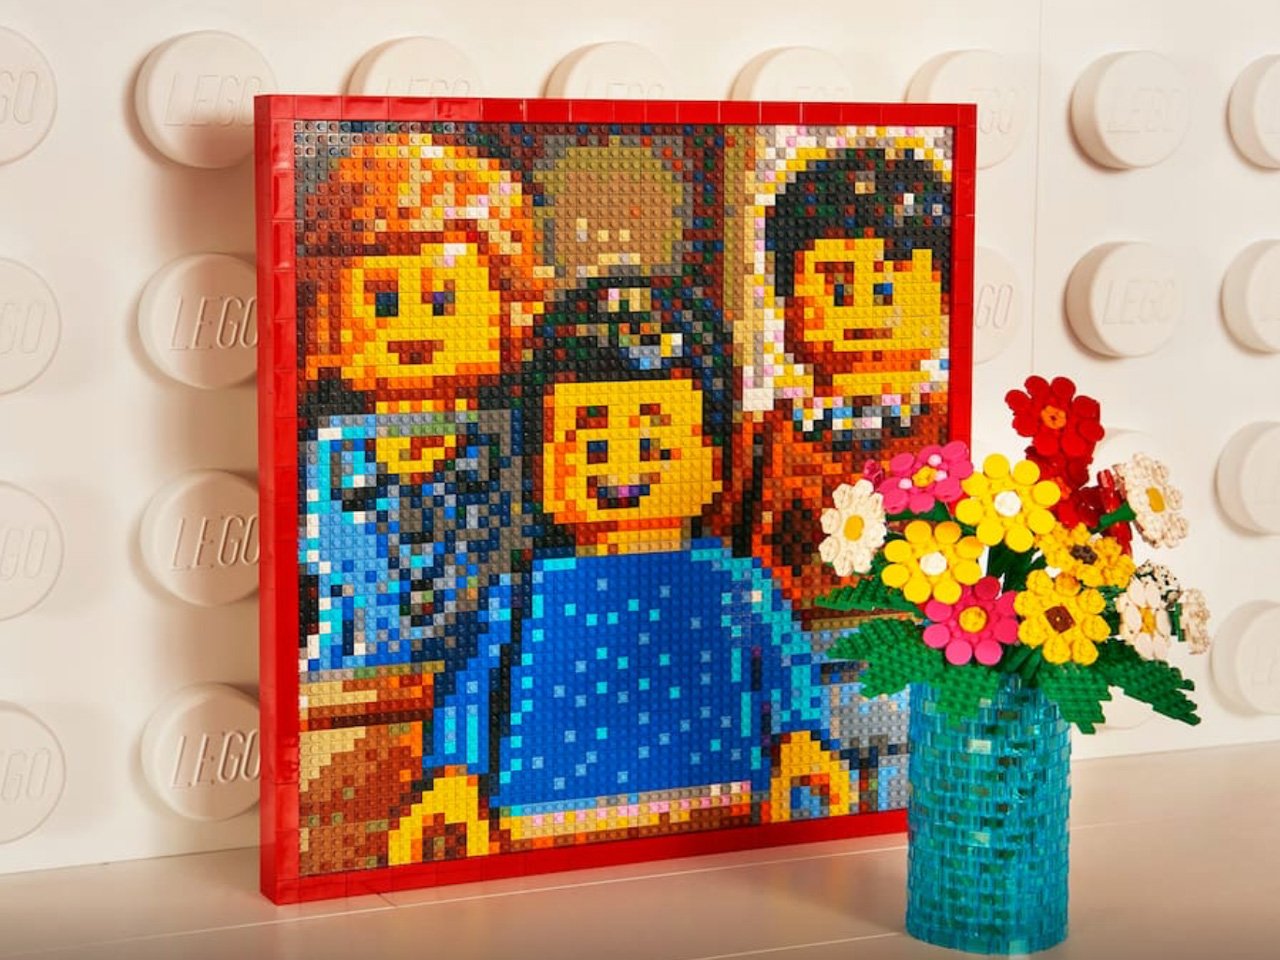 family portrait and floral arrangement made from Lego